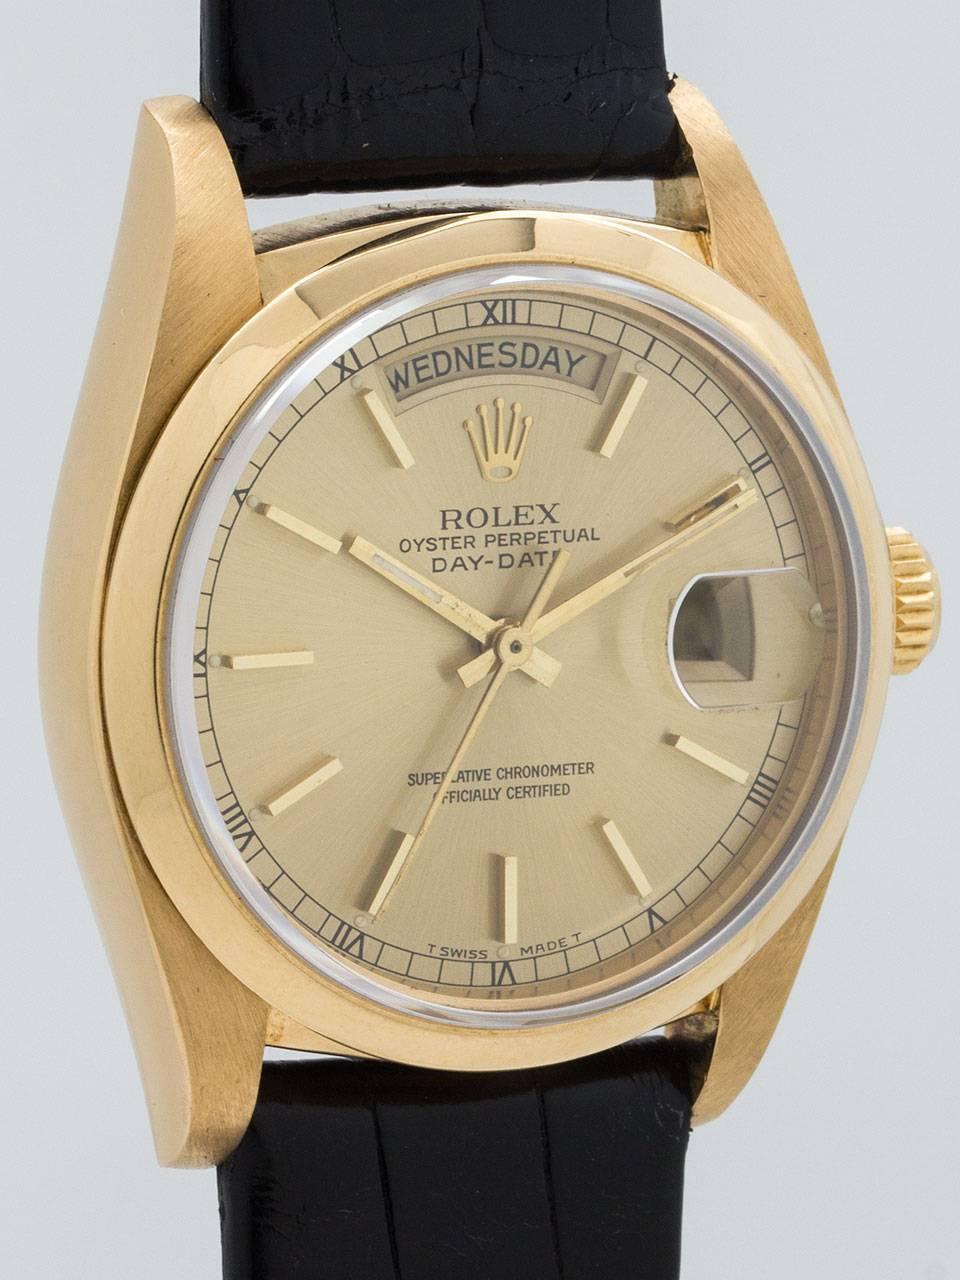 Rolex 18K Yellow Gold Day Date ref 1803 serial no. 5.7 million circa 1978/79. Super sharp condition 36mm diameter full size man’s model with smooth bezel and sapphire crystal. Very pleasing original champagne pie pan dial with applied gold indexes,